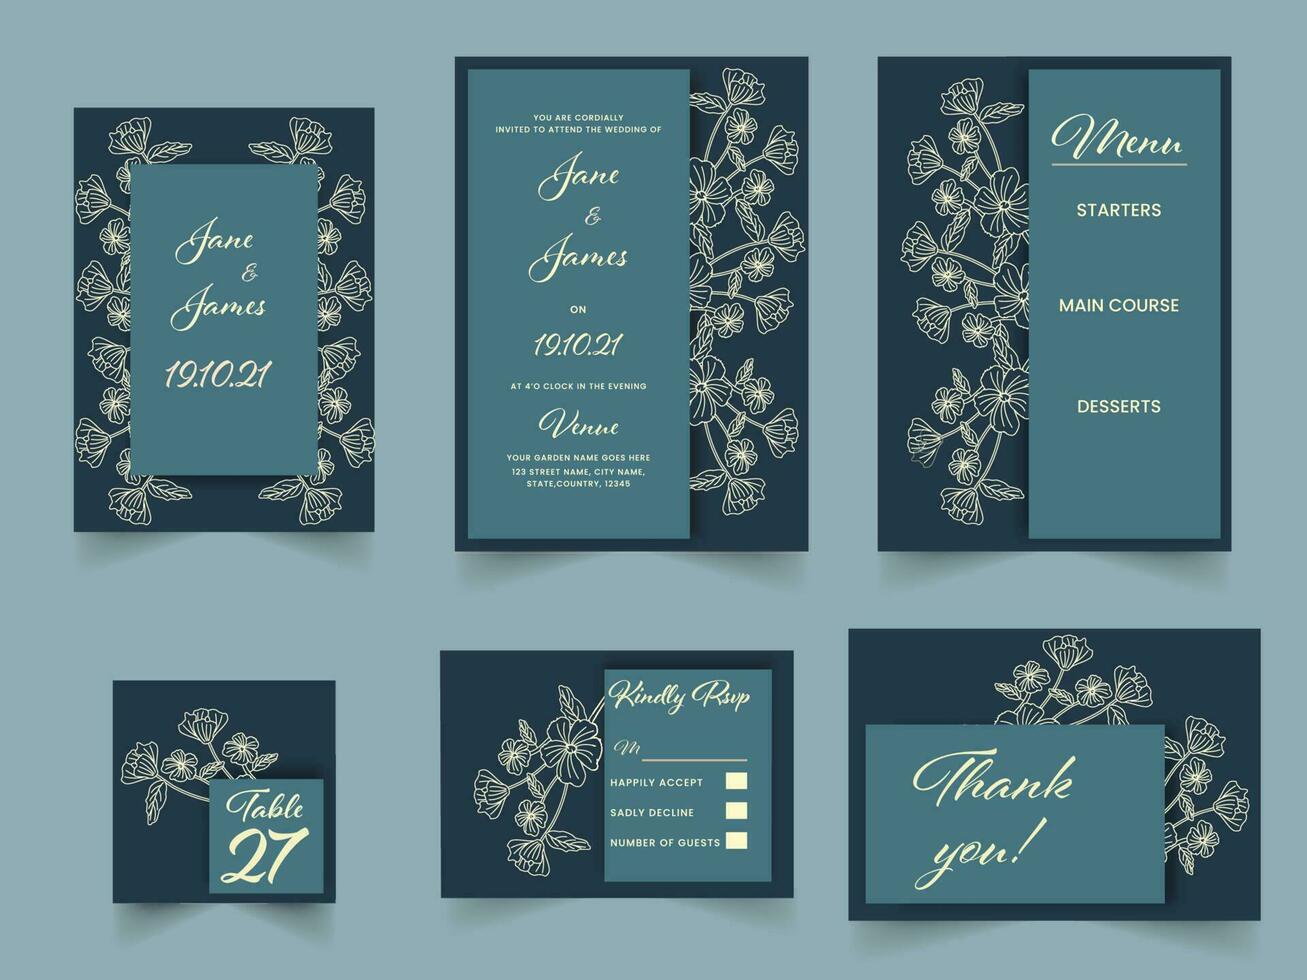 Beautiful Floral Wedding Invitation Suite In Teal Blue Color. vector